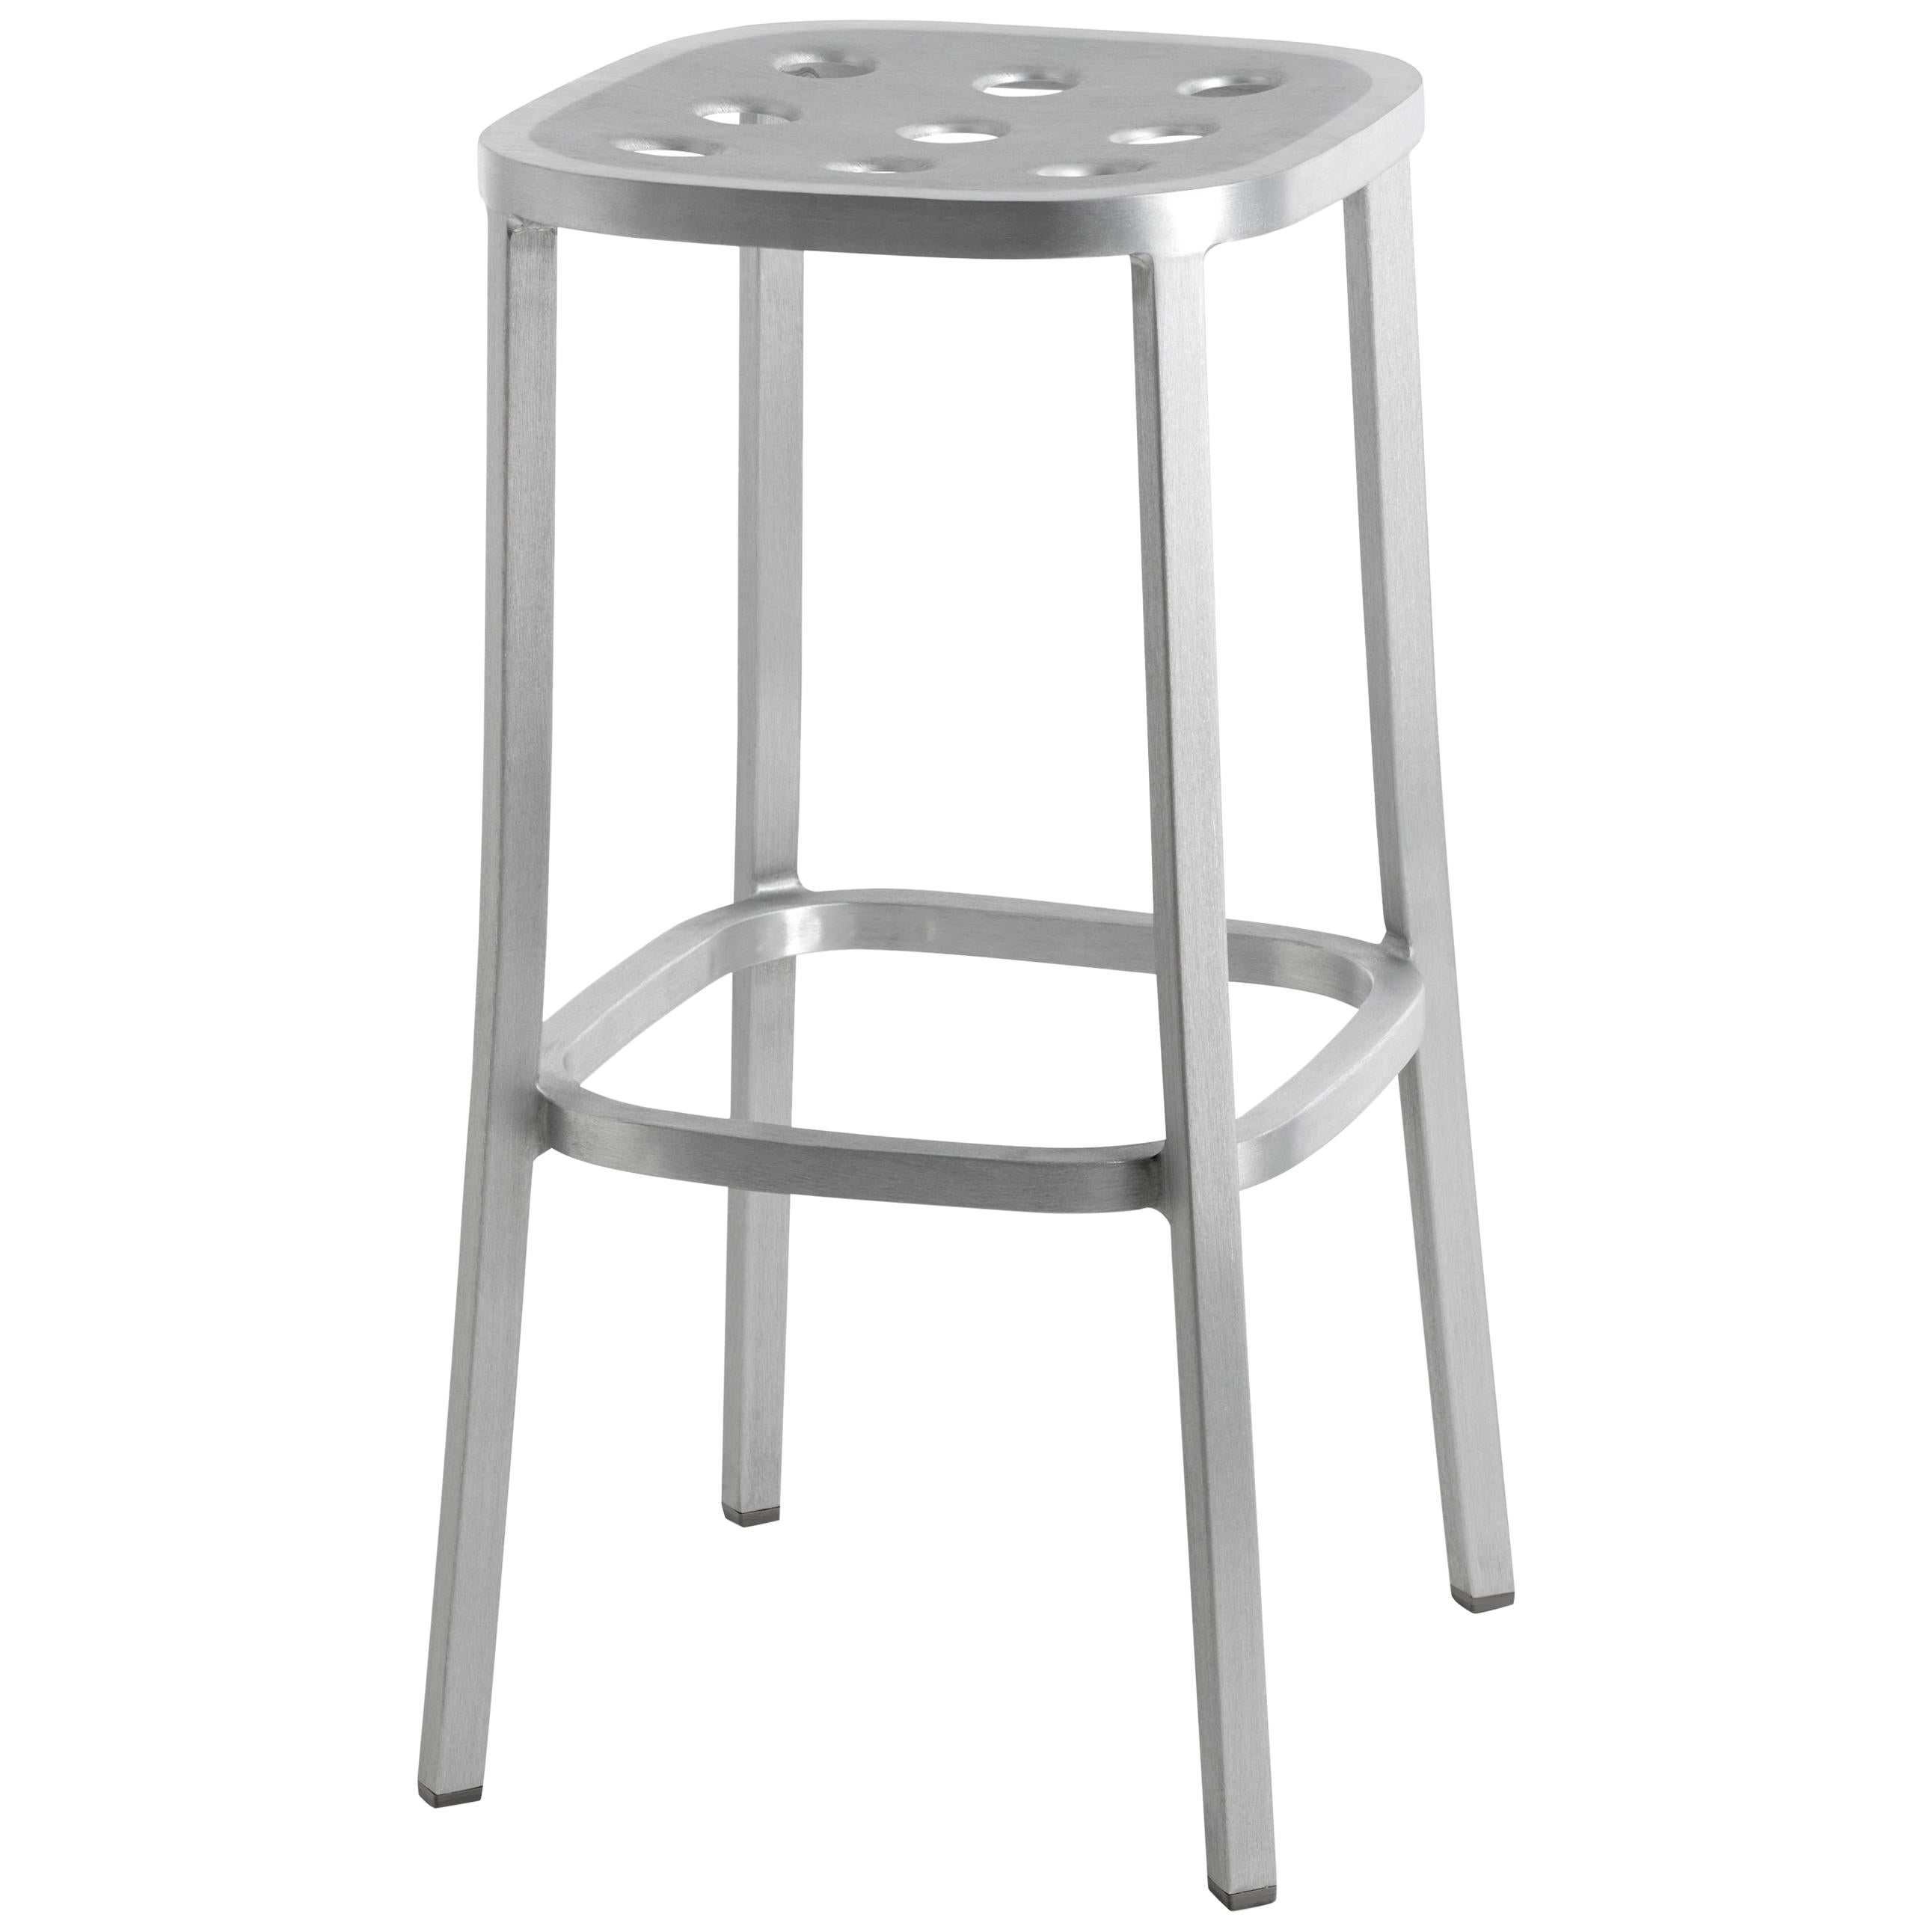 Emeco 1 Inch All Aluminum Barstool by Jasper Morrison, 1stdibs Exclusive